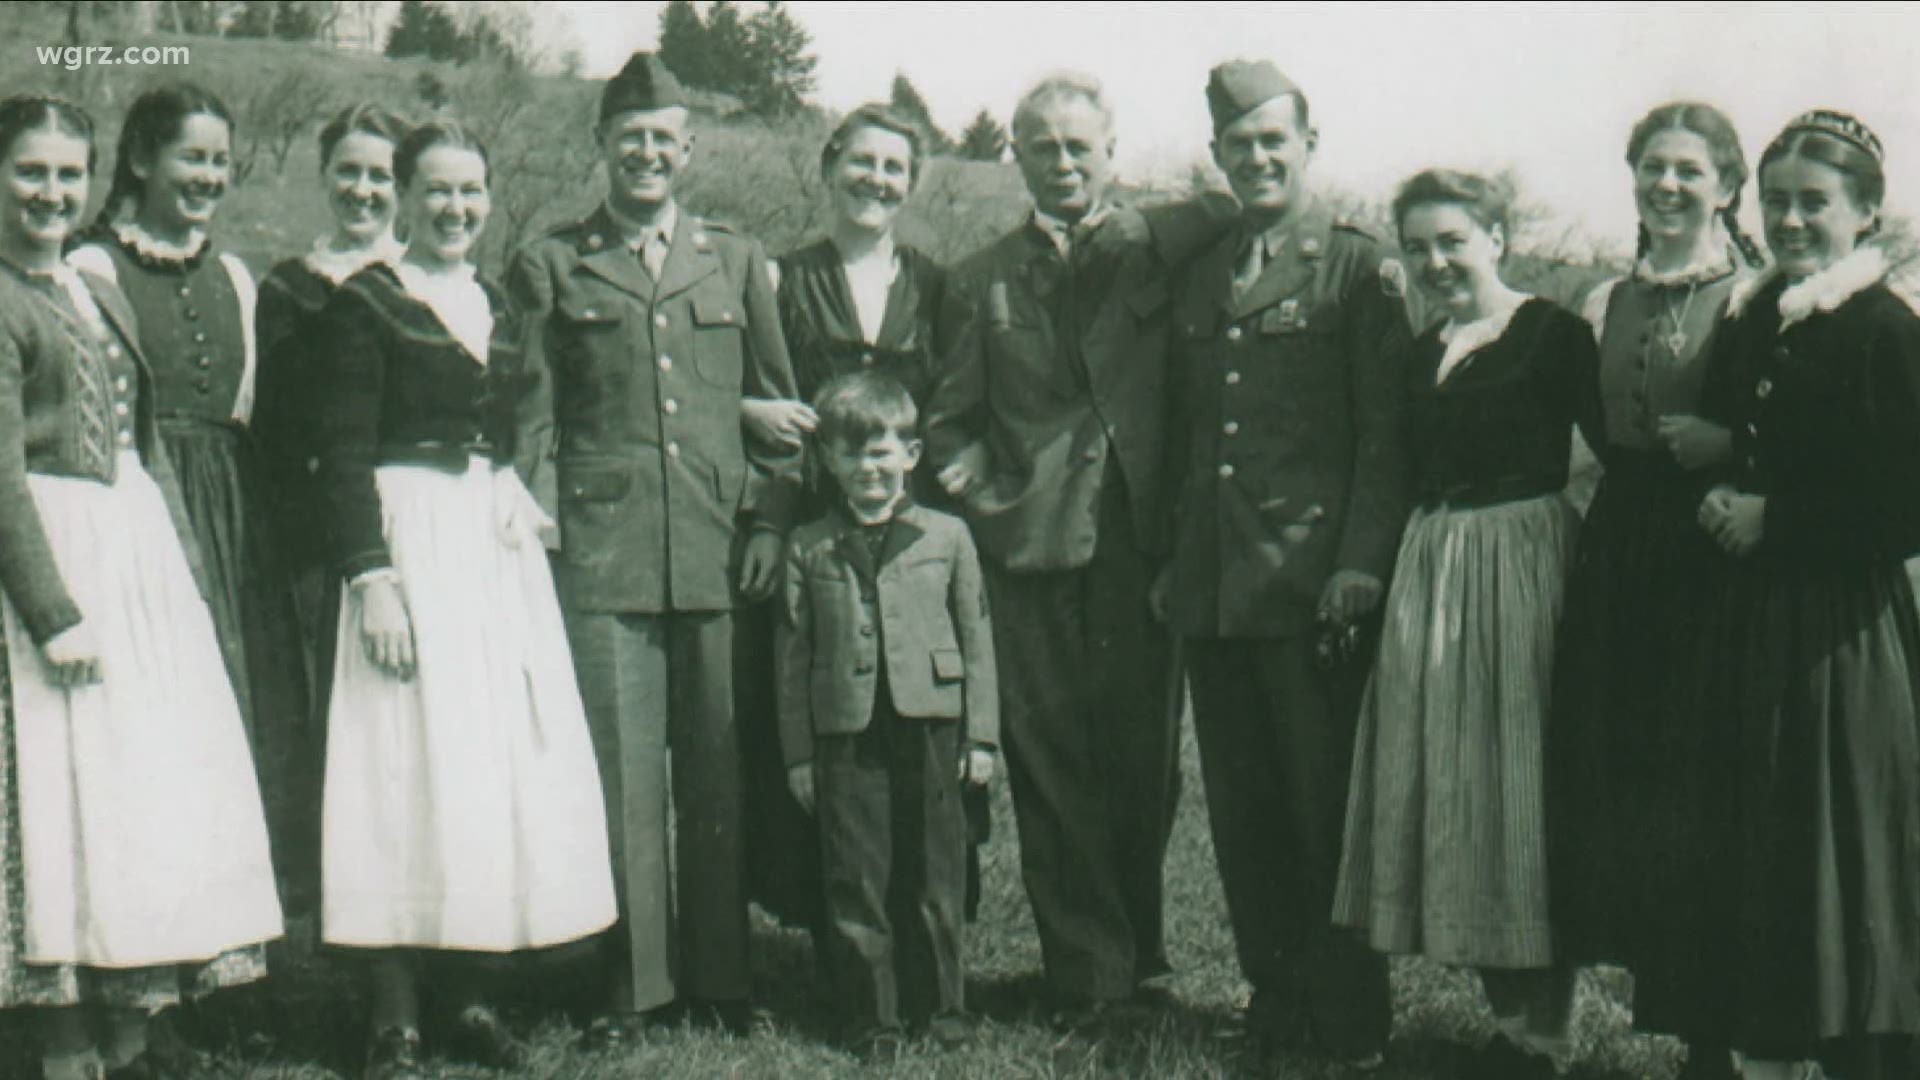 The family whose story is the inspiration for "The Sound of Music" have several connections to WNY.